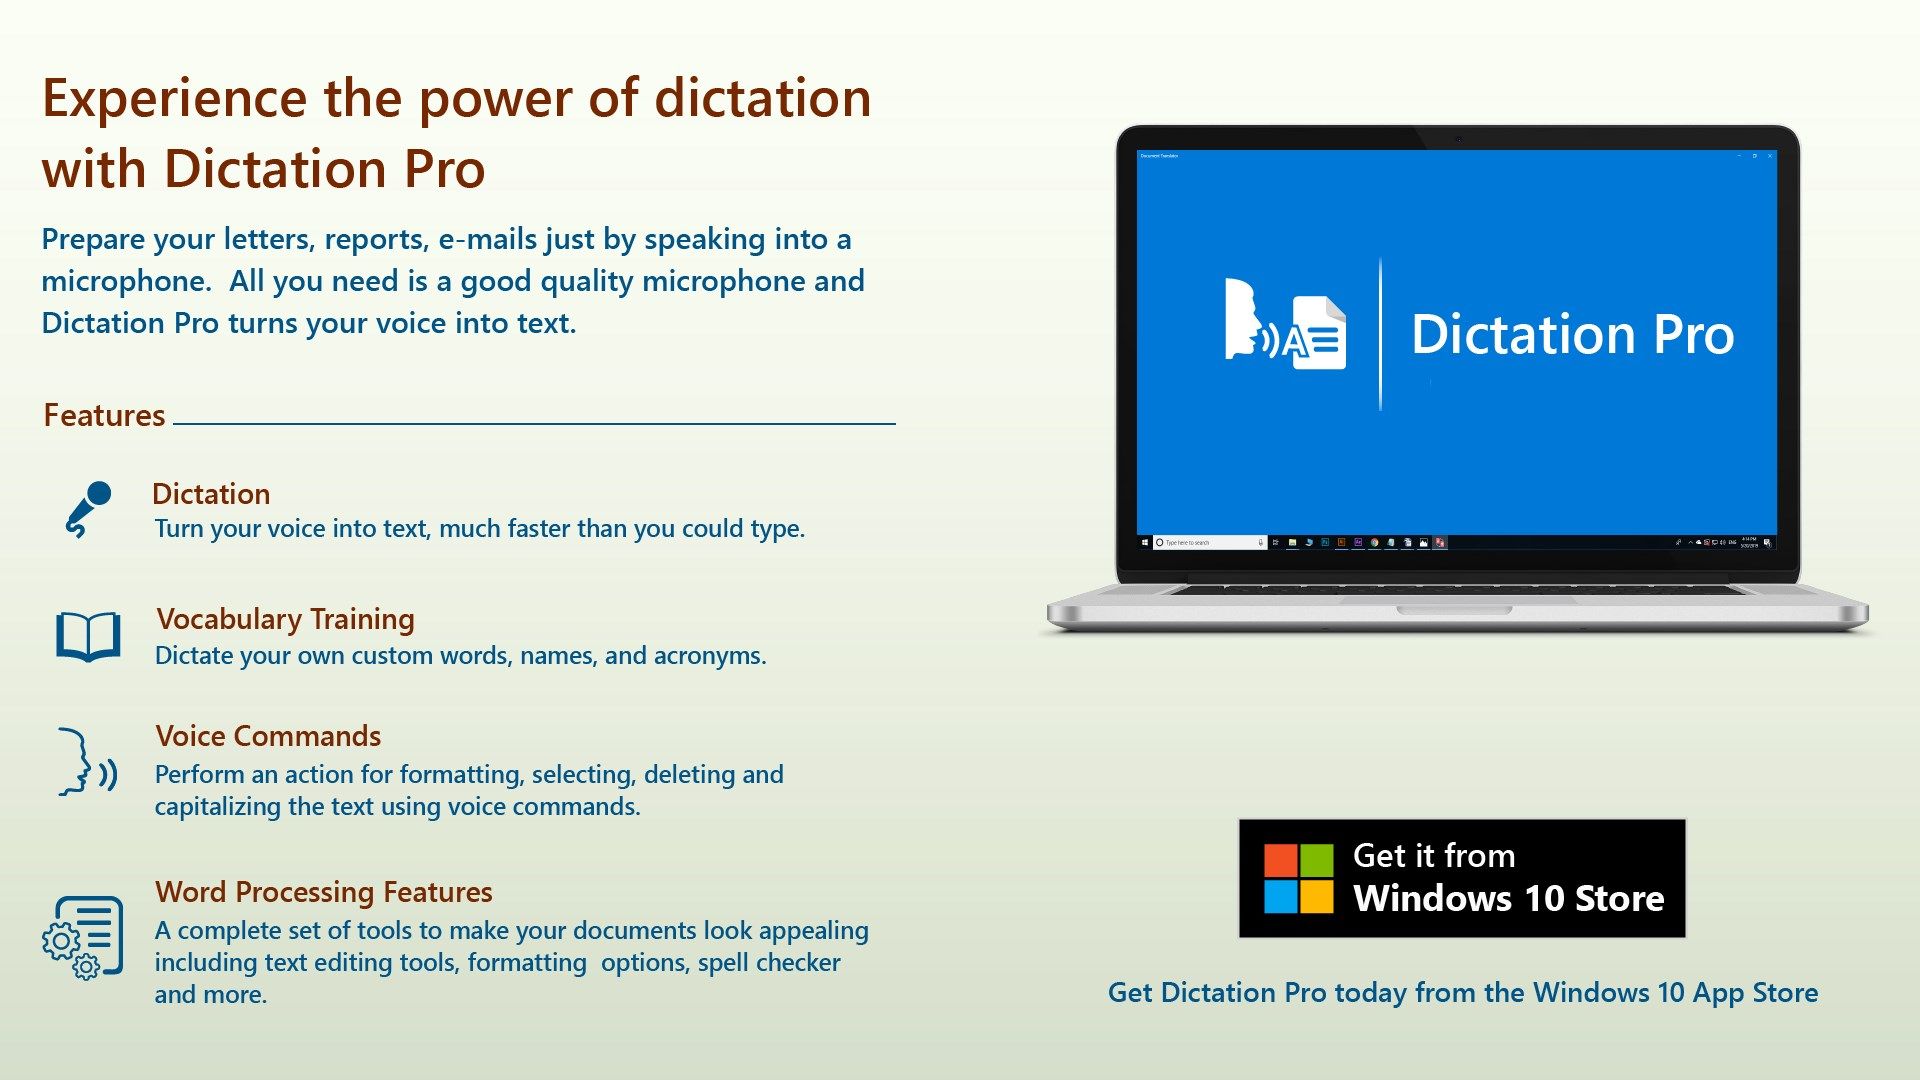 Dictation Pro Features